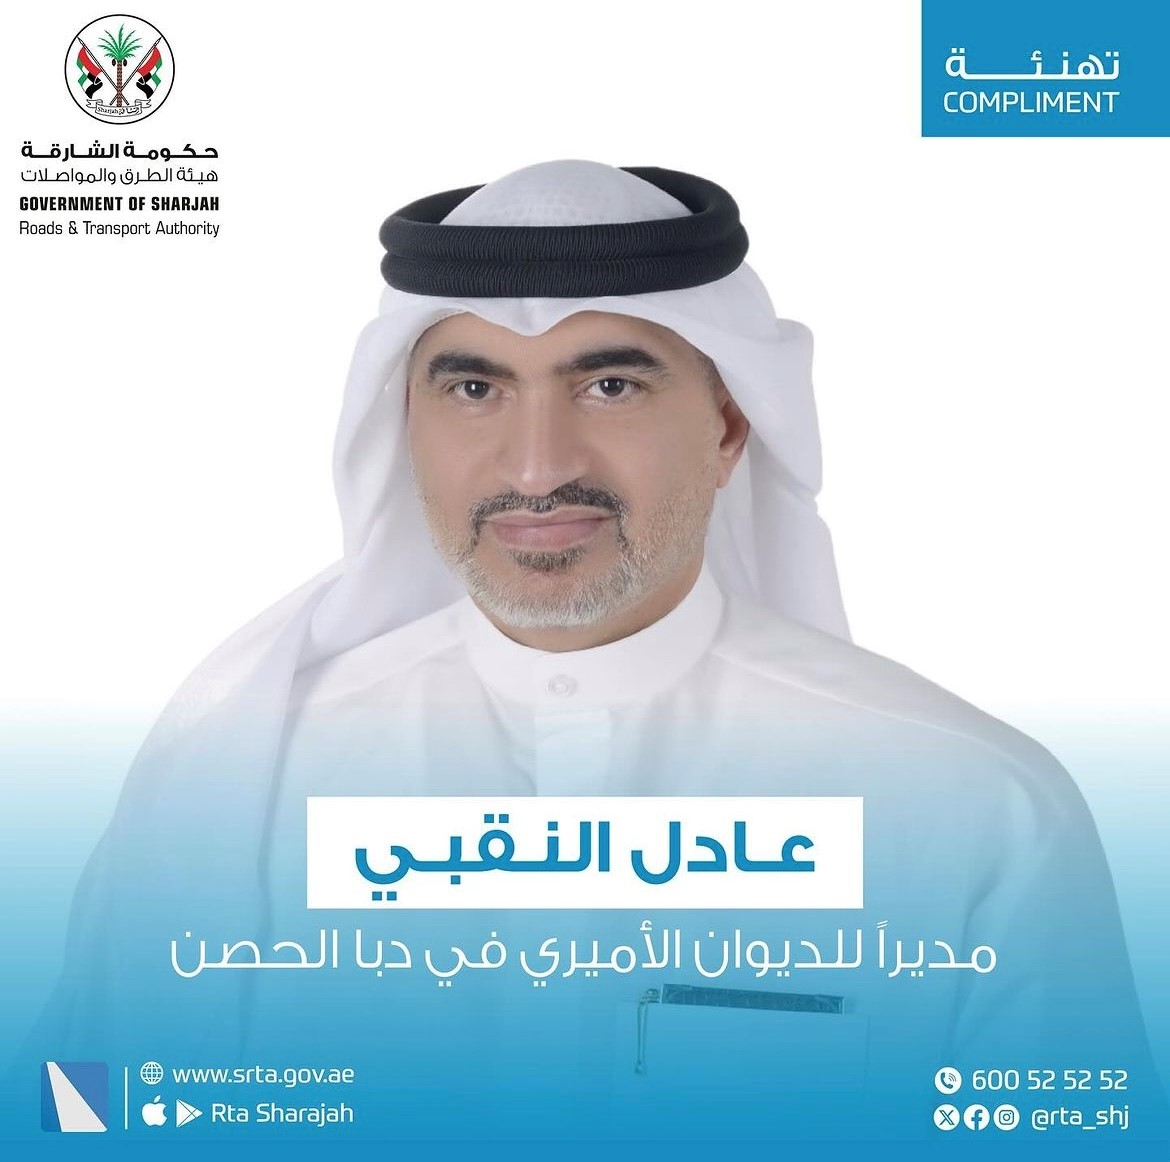 The Authority extends its blessings to His Excellency Adel Ahmed Ali Alwan Al Naqbi